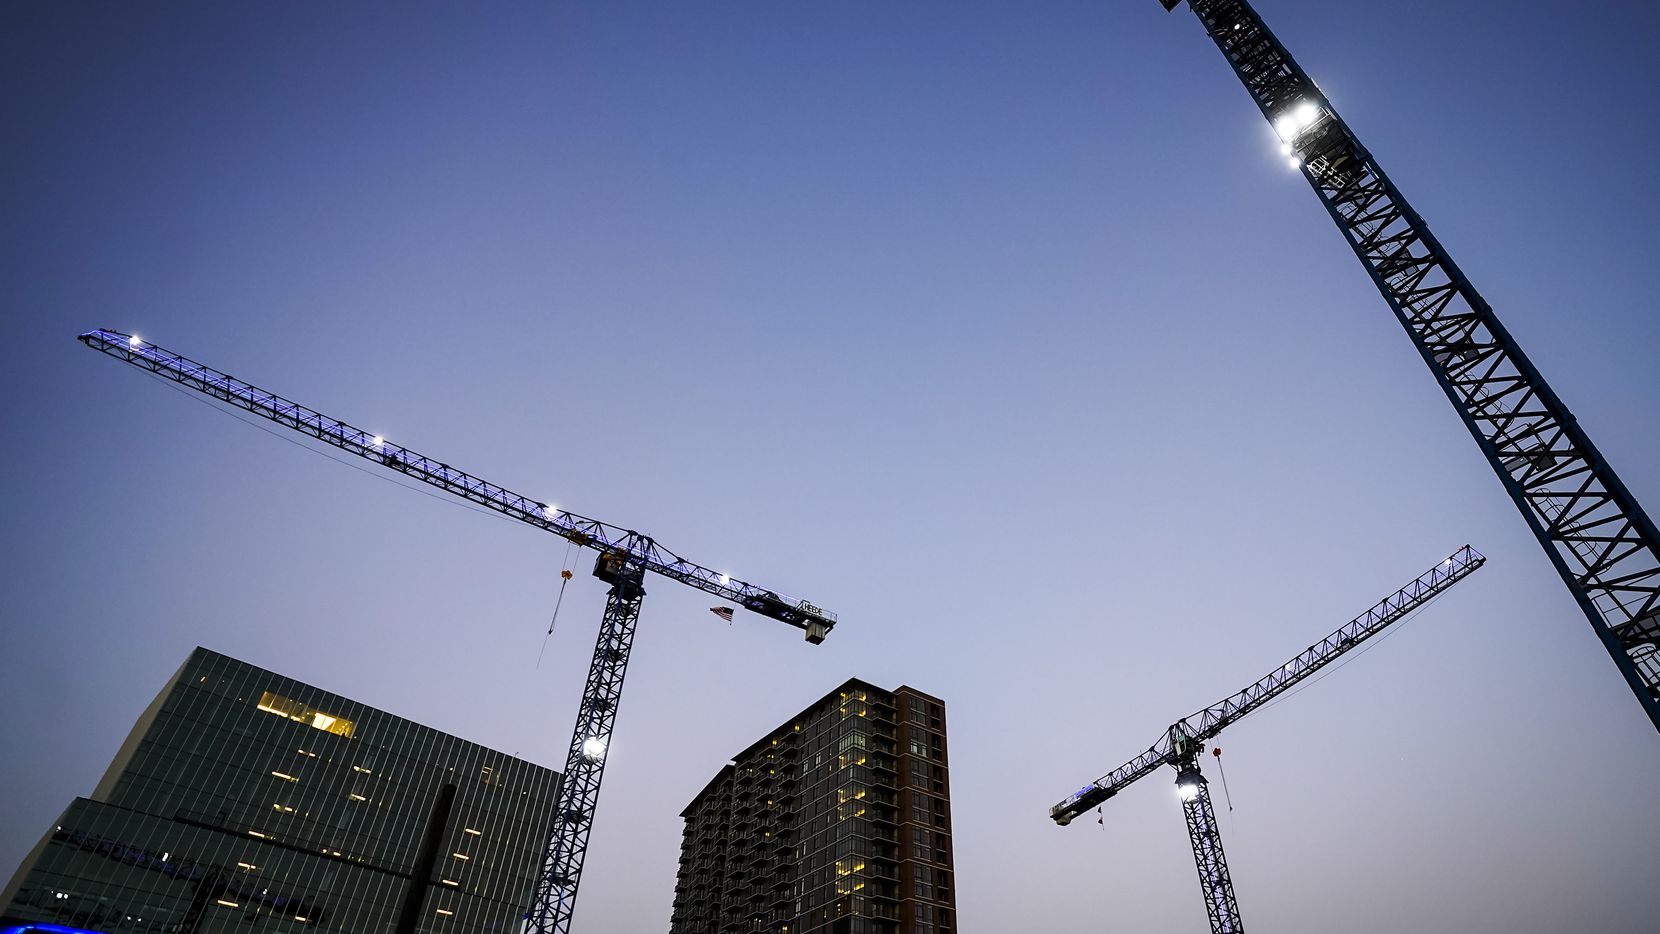 Texas is tops in the U.S. for commercial development impact